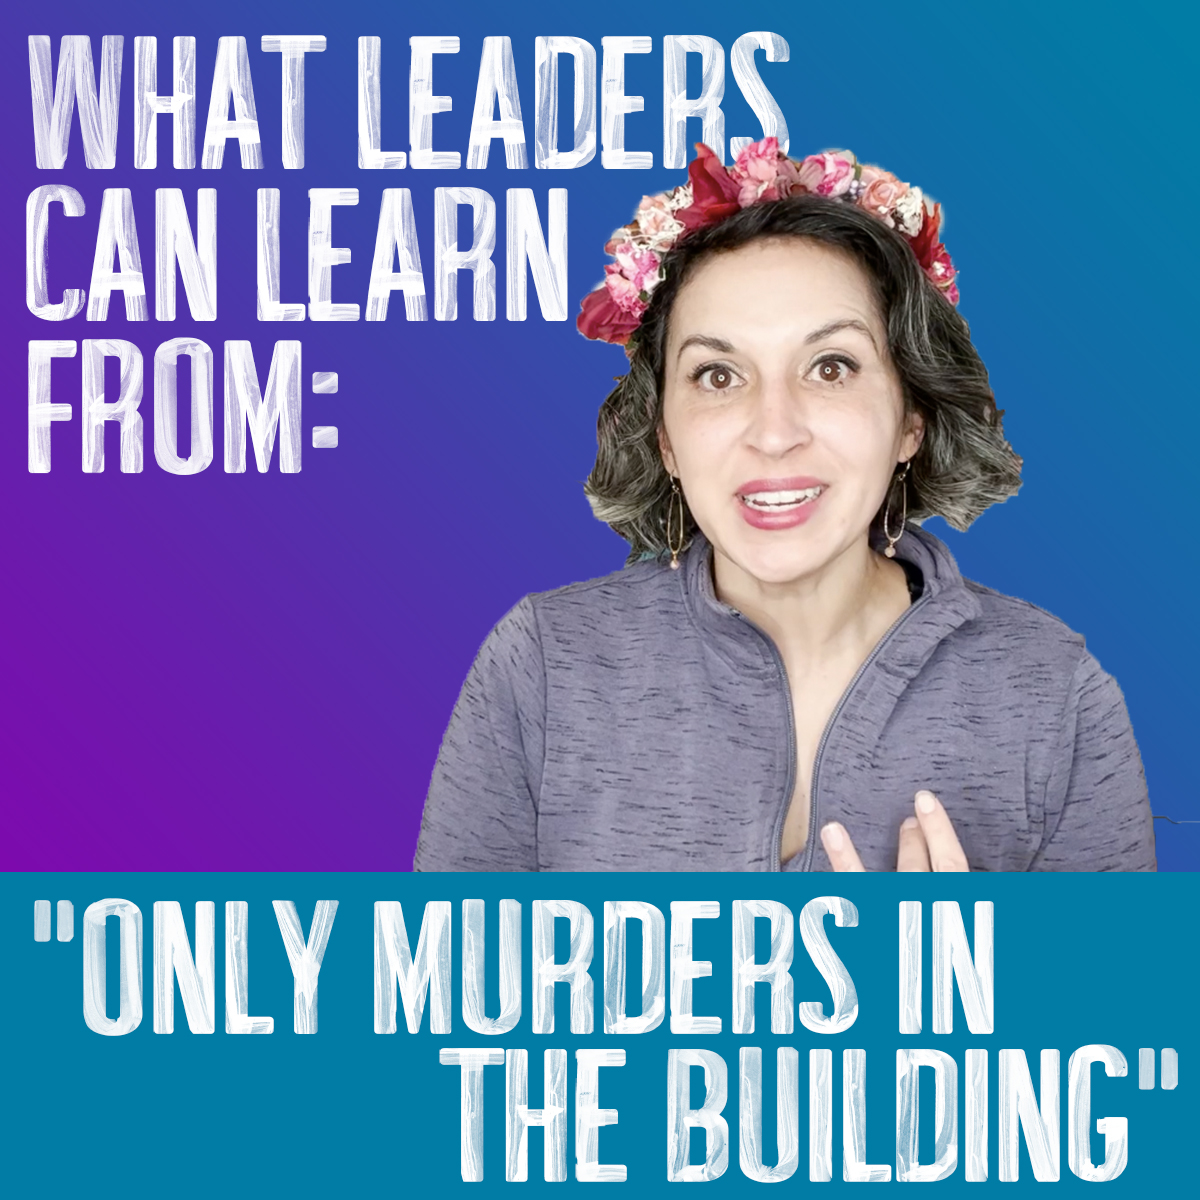 What Leaders Can Learn from “Only Murders in the Building”